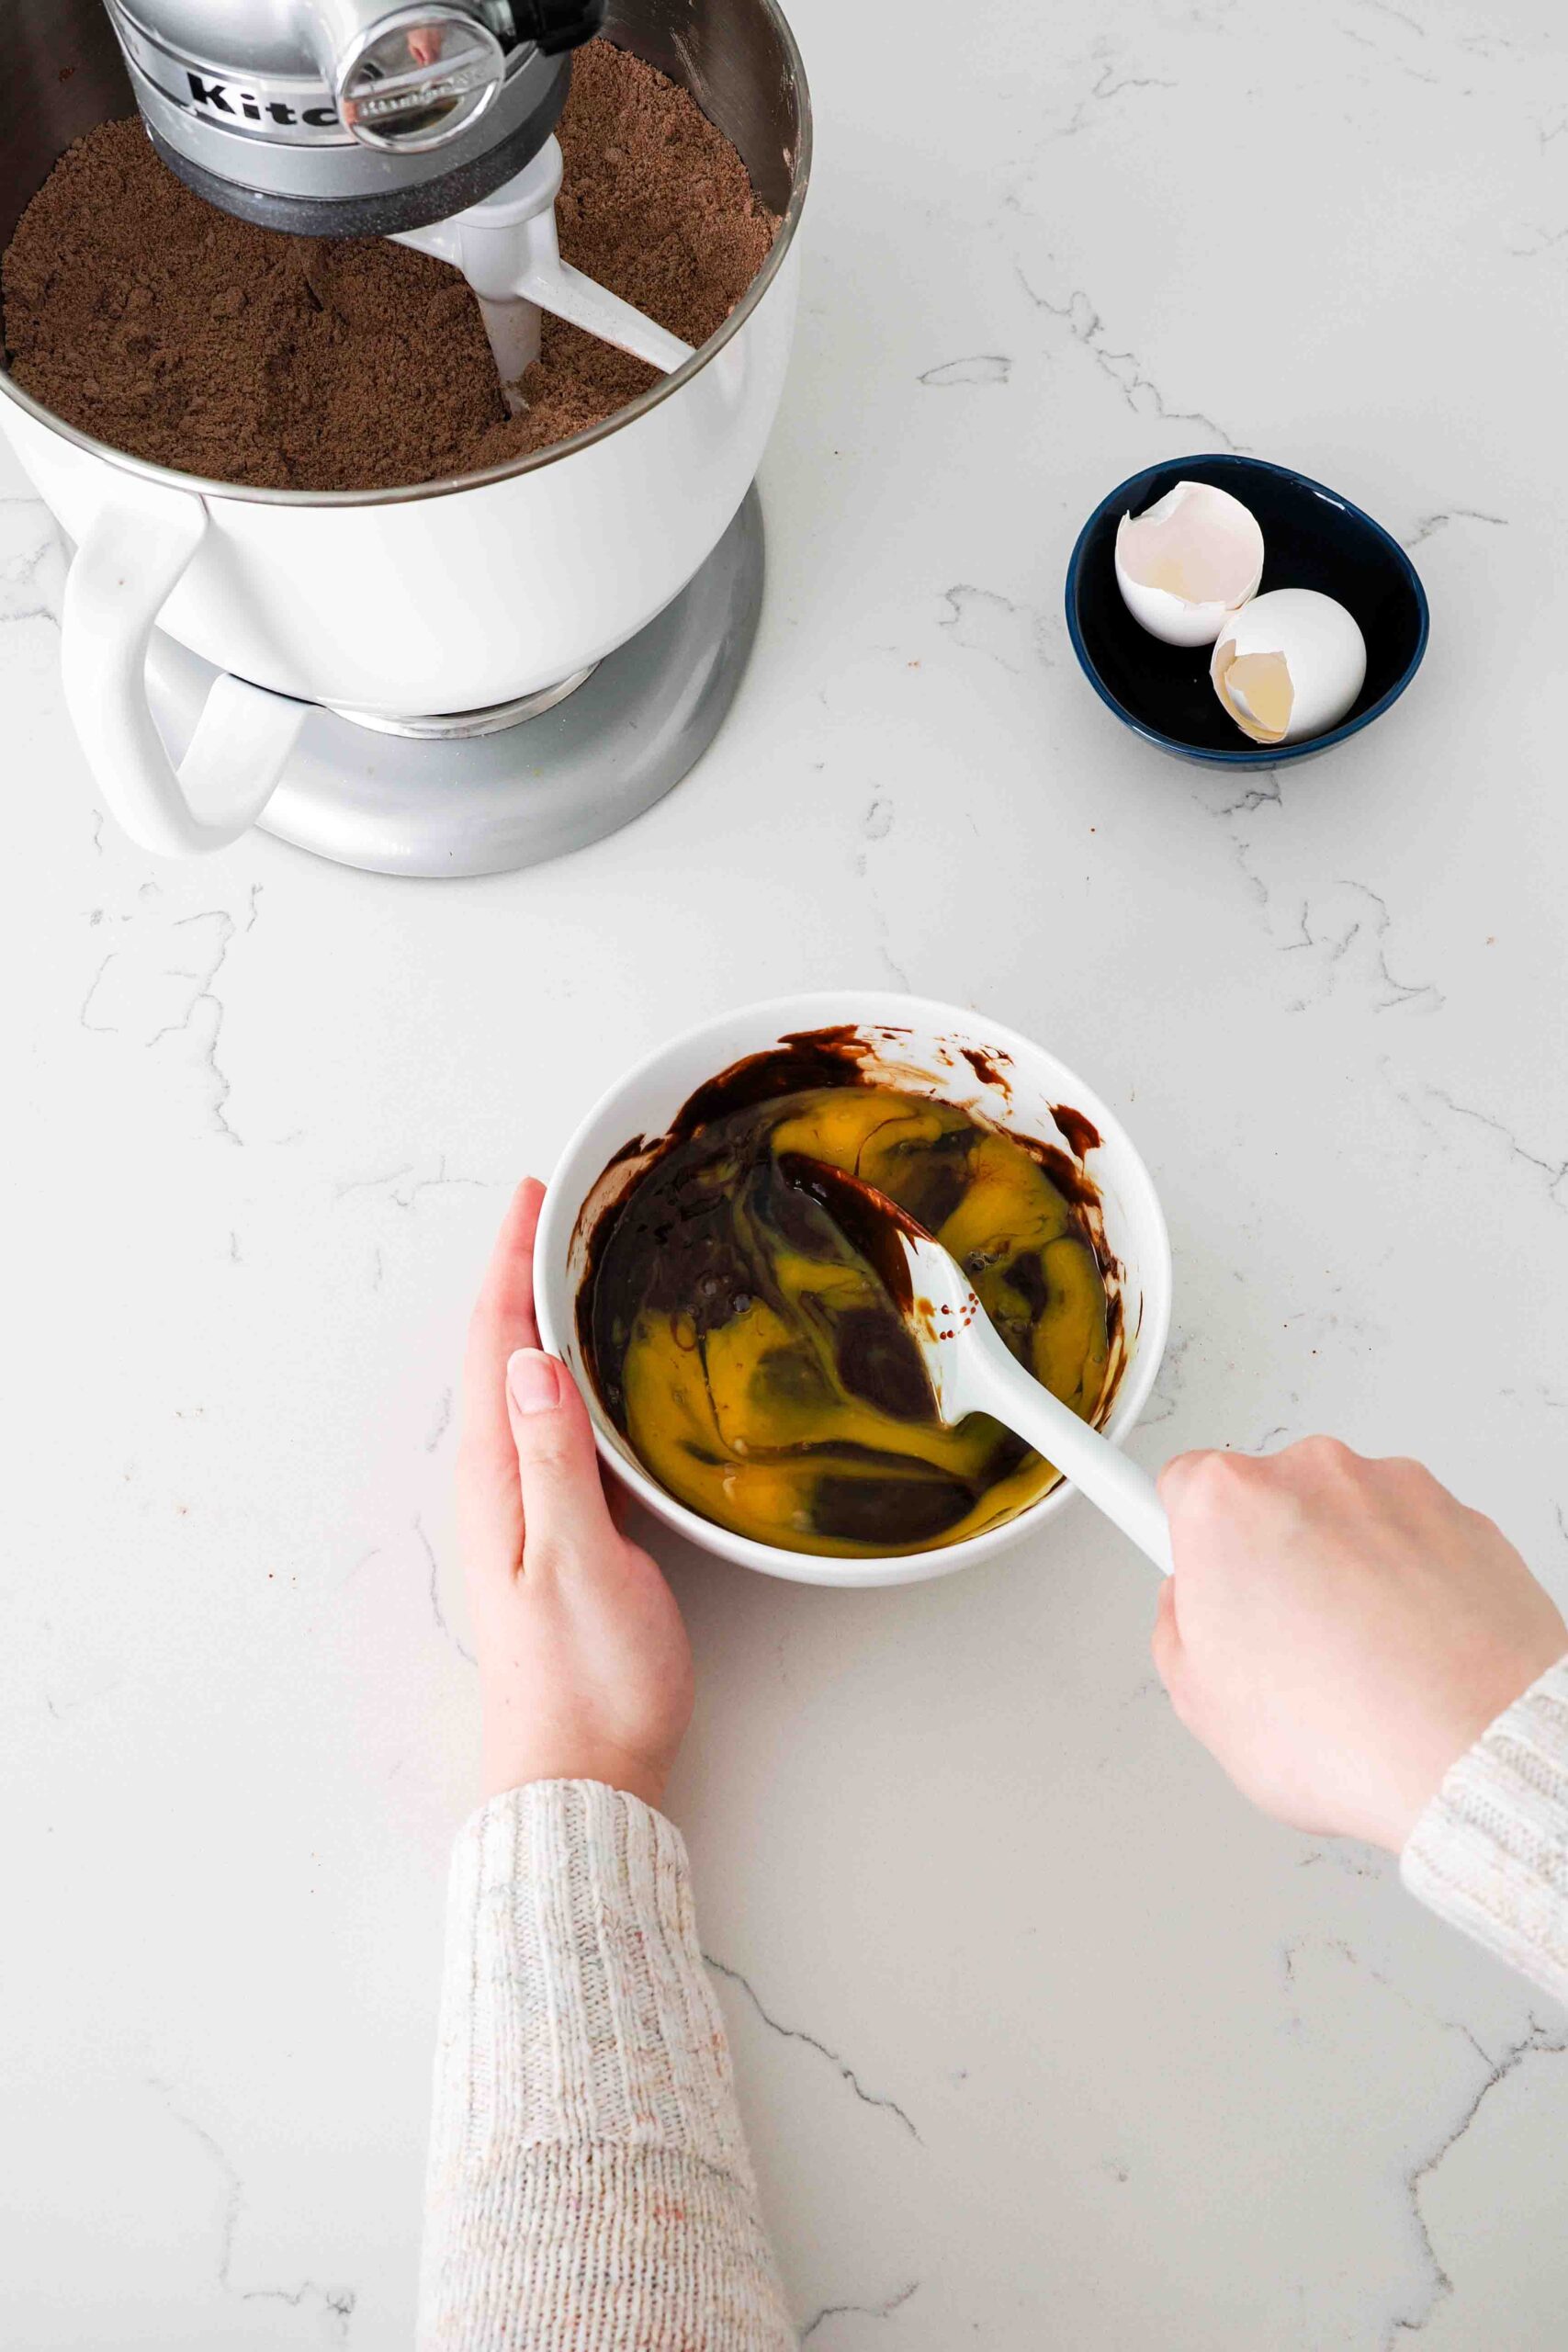 Two hands stir together eggs, molasses, and melted chocolate.